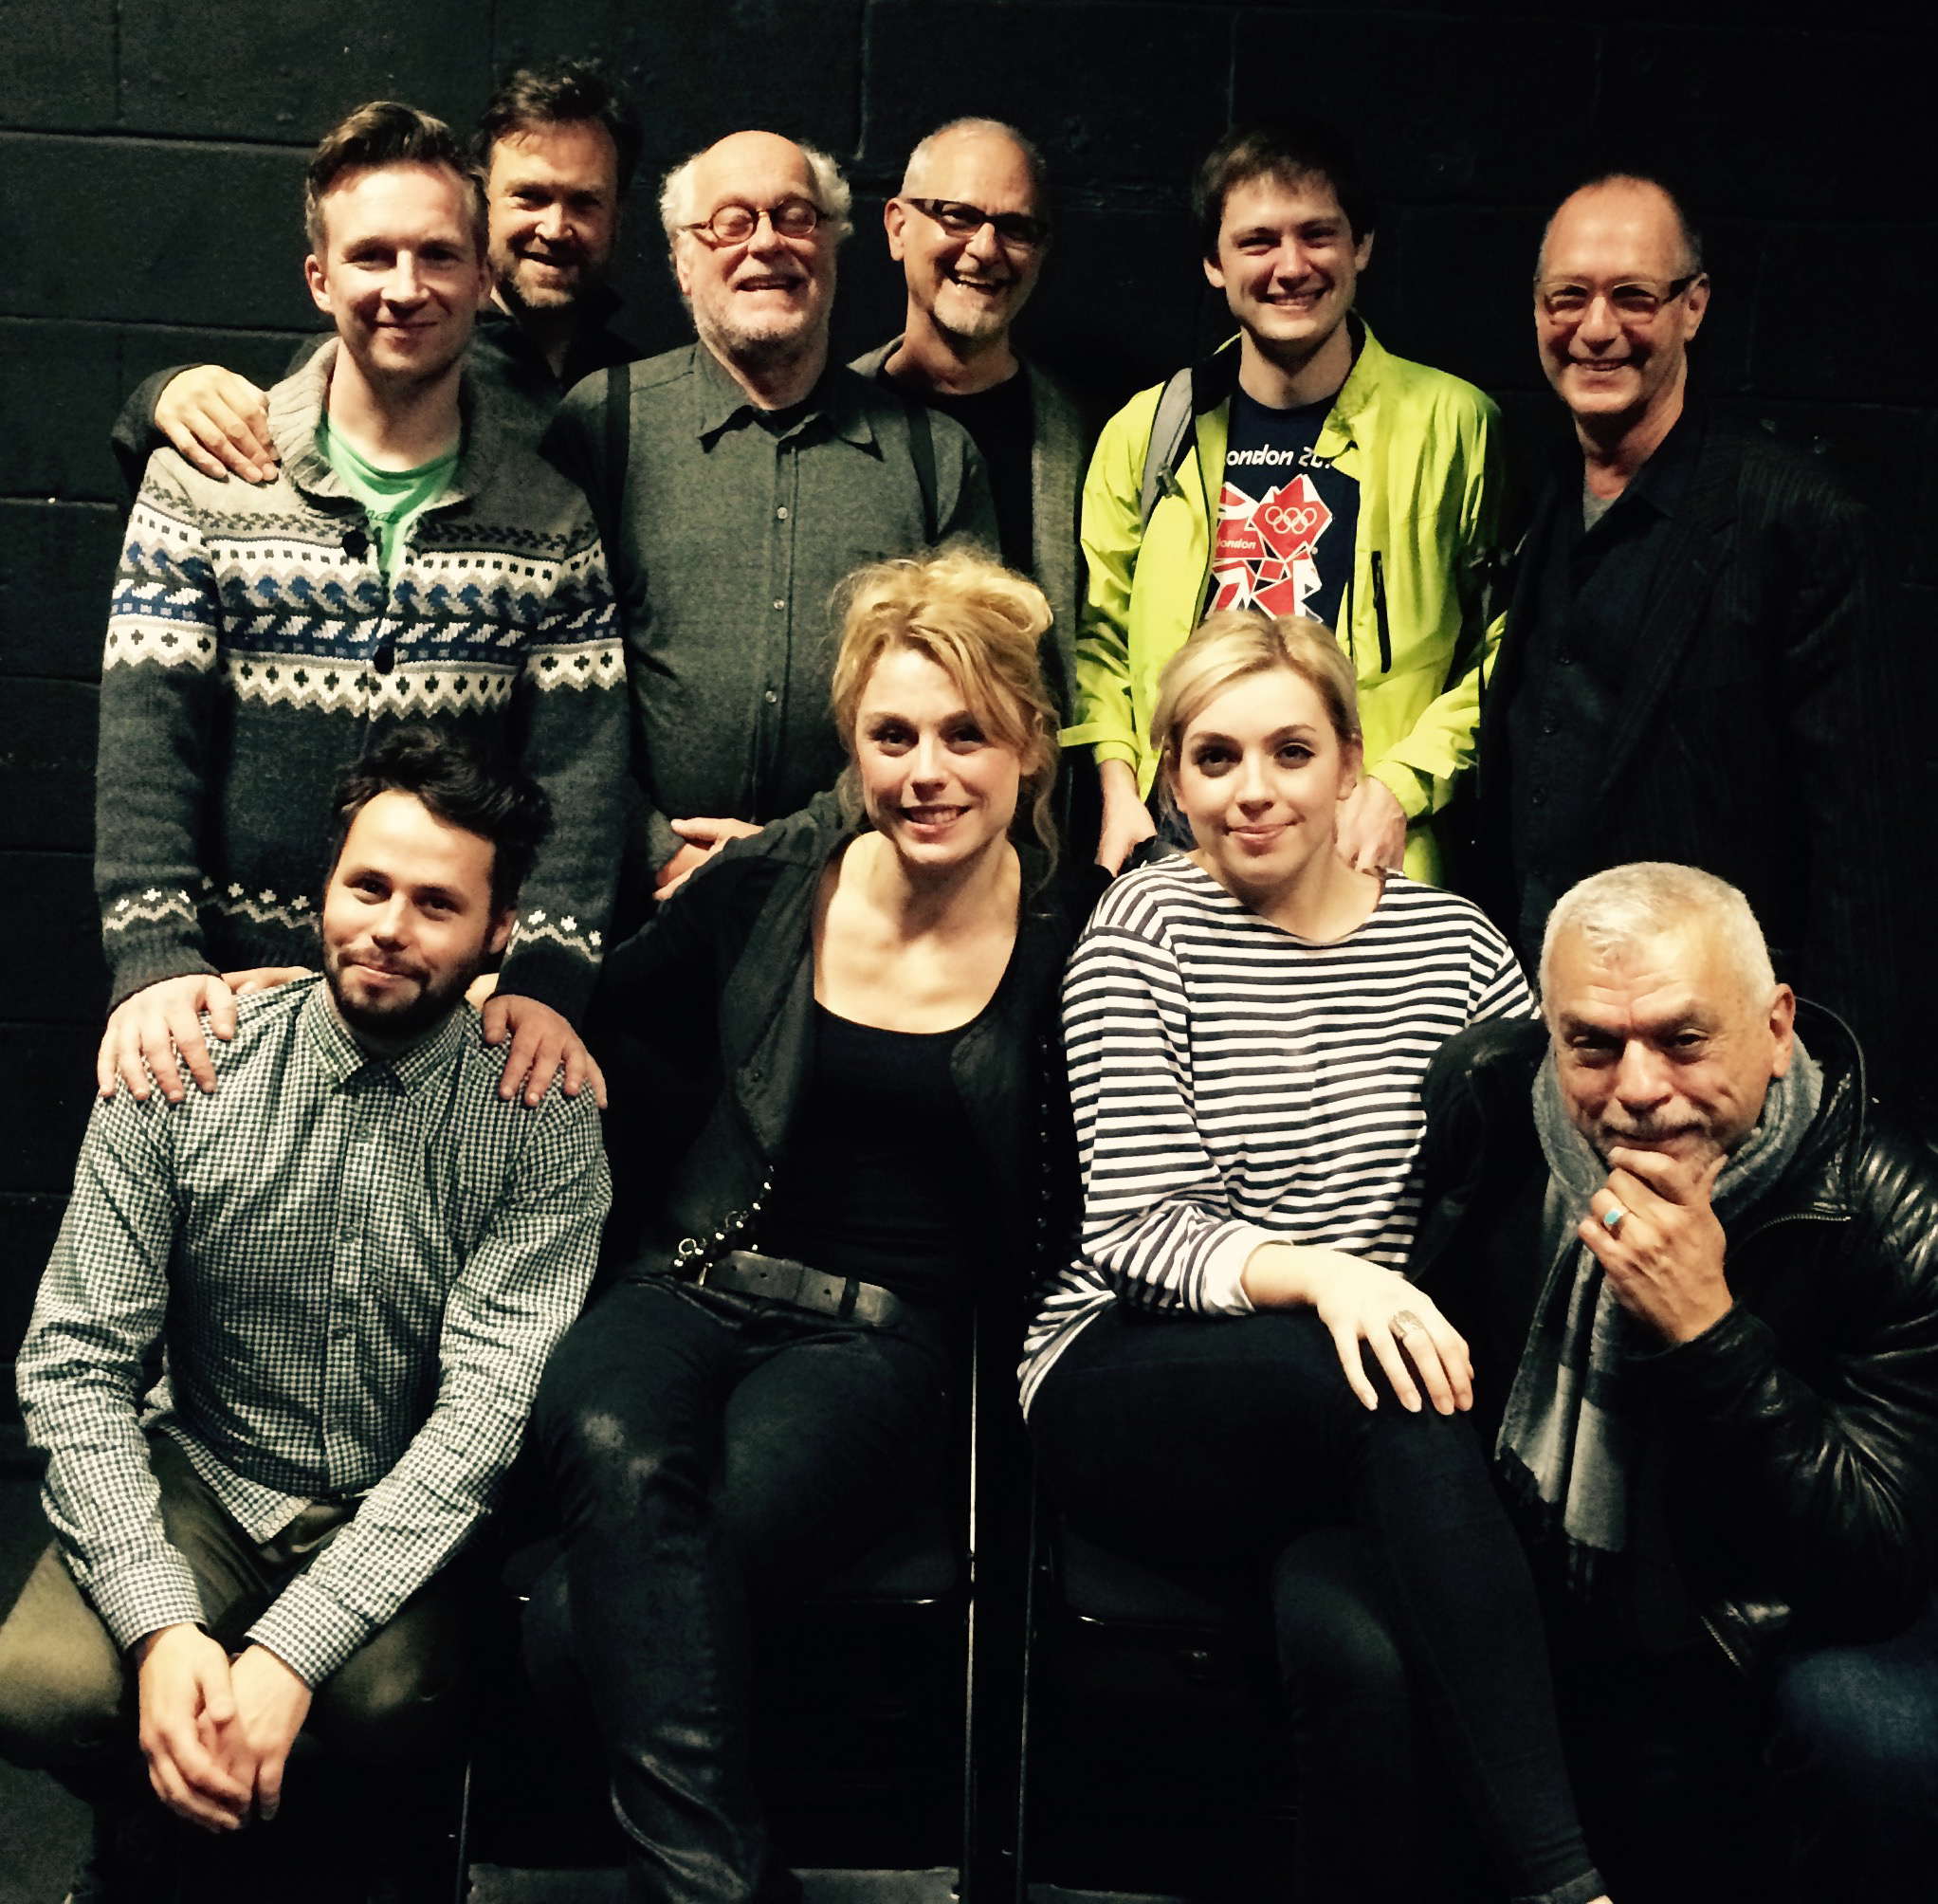 The Cast & Creative Team on stage after our London Showcase, 2015